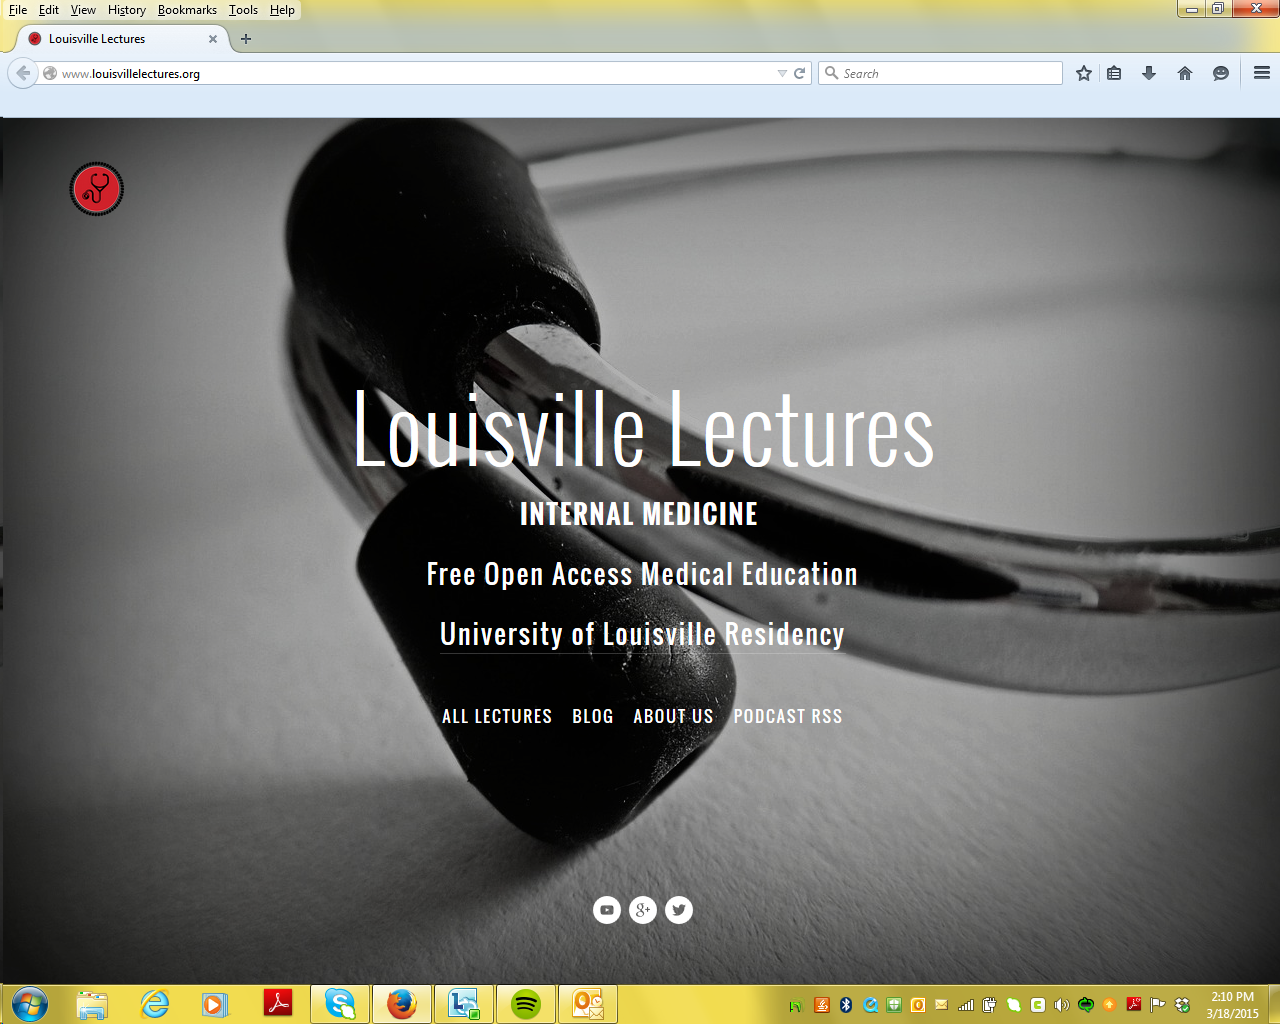 UofL is first to launch free open access internal medicine education series